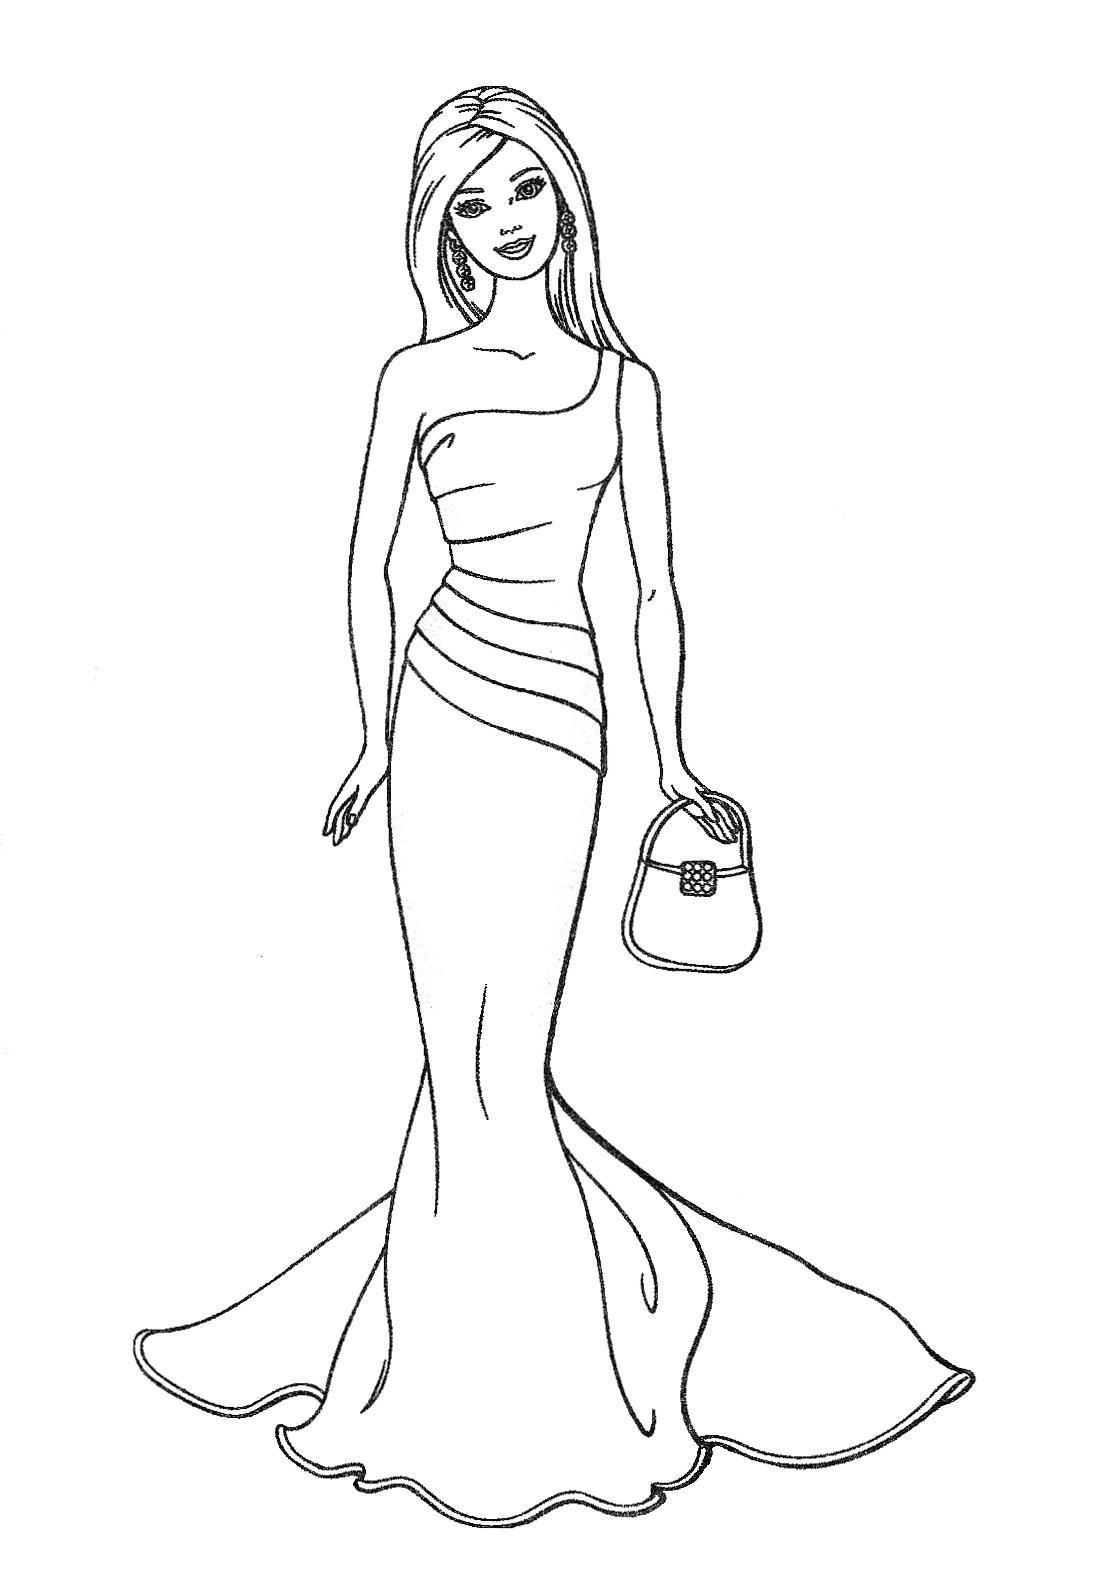 Free Printable Barbie Coloring Pages For Kids Coloring Wallpapers Download Free Images Wallpaper [coloring436.blogspot.com]